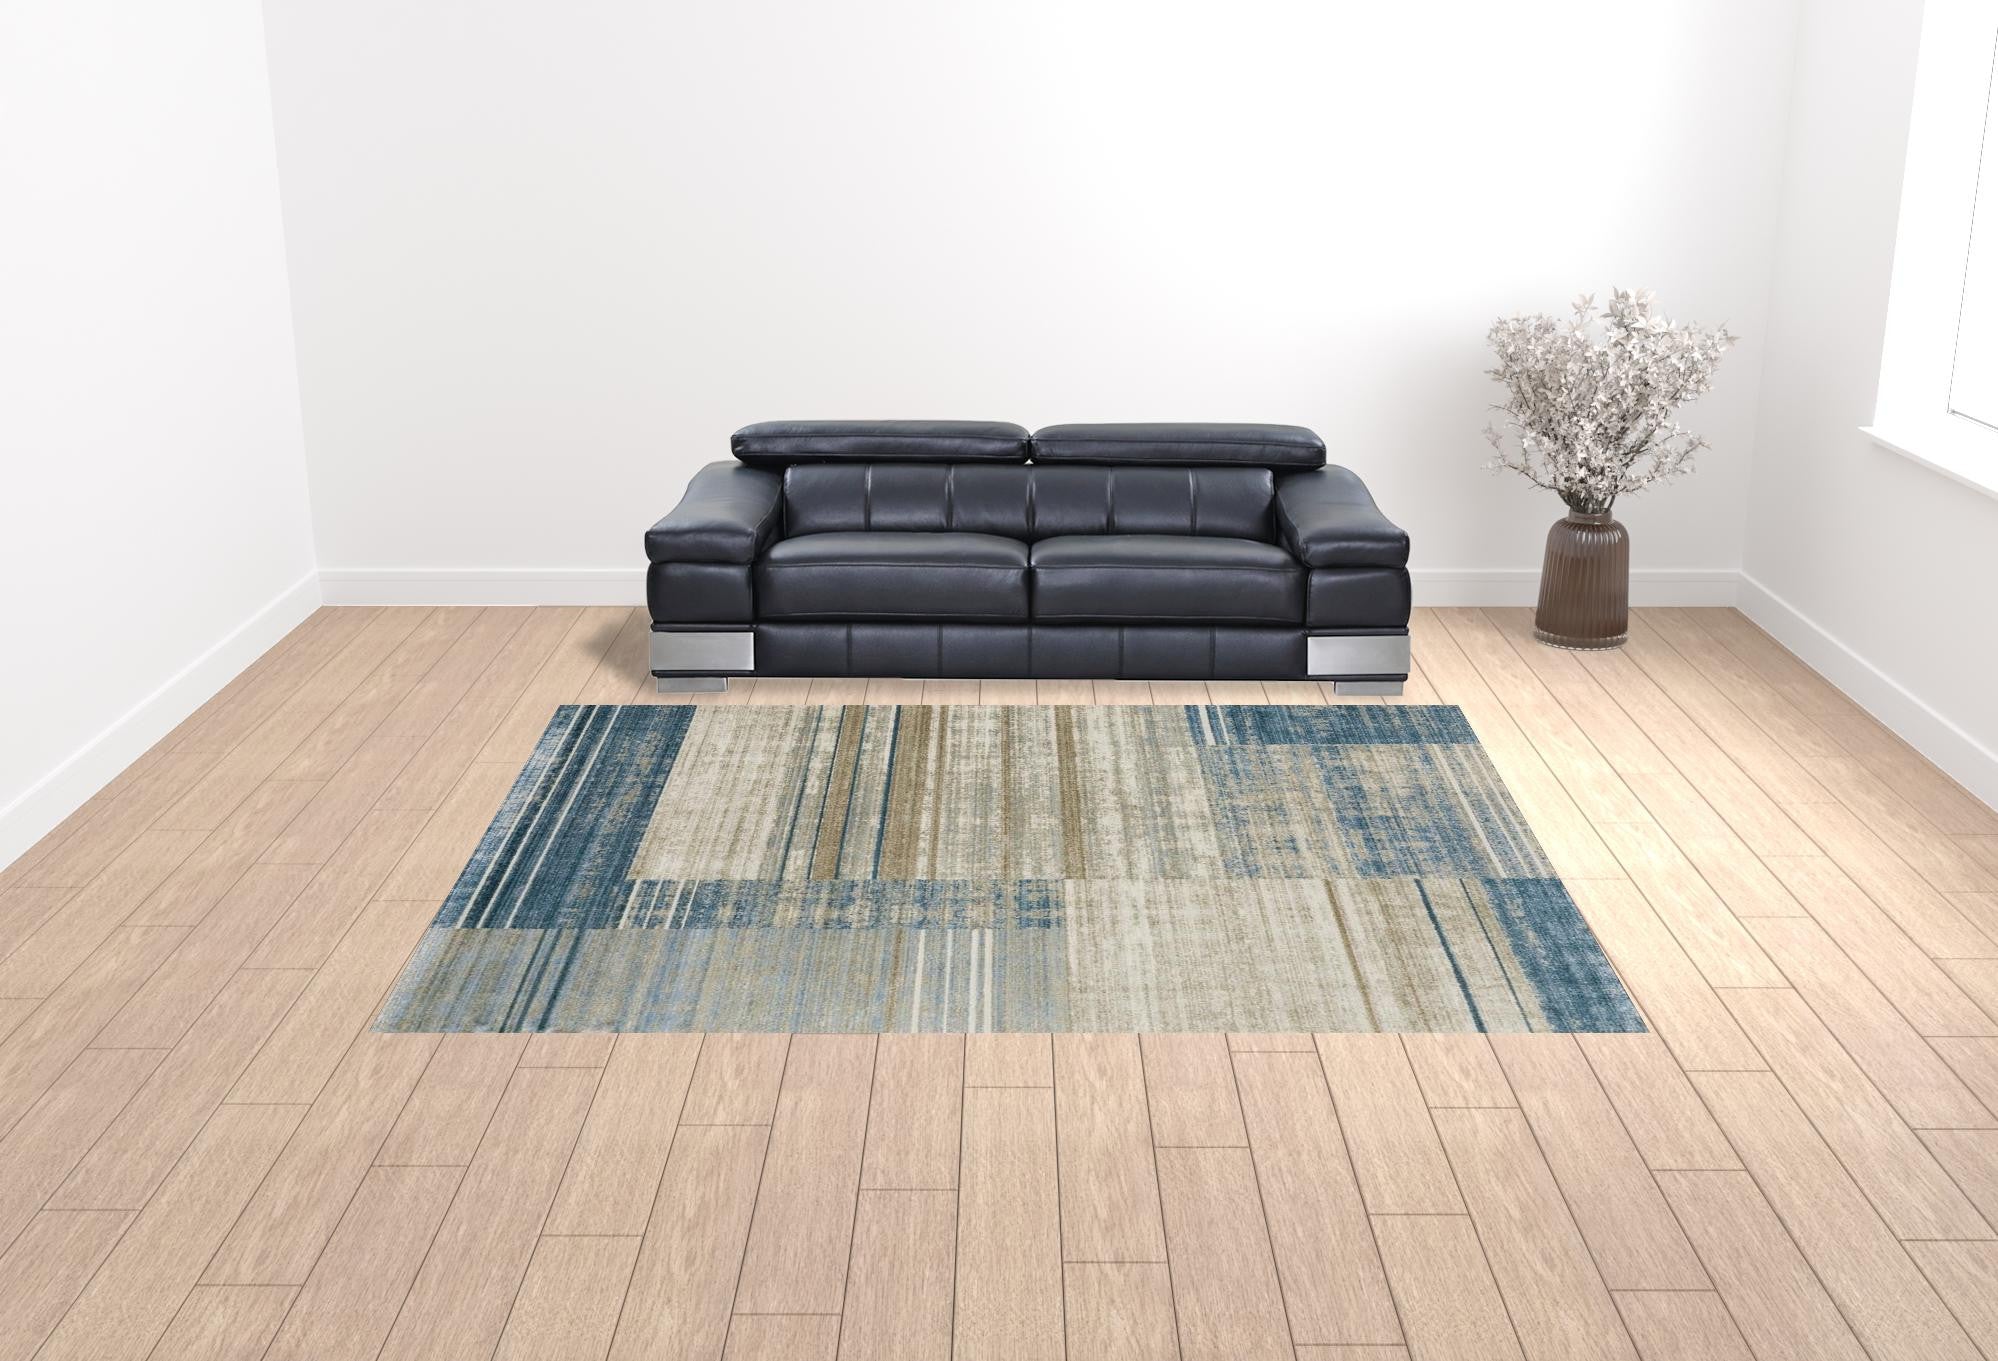 10' X 13' Blue Dark Blue Teal Grey Ivory Beige And Tan Geometric Power Loom Stain Resistant Area Rug With Fringe